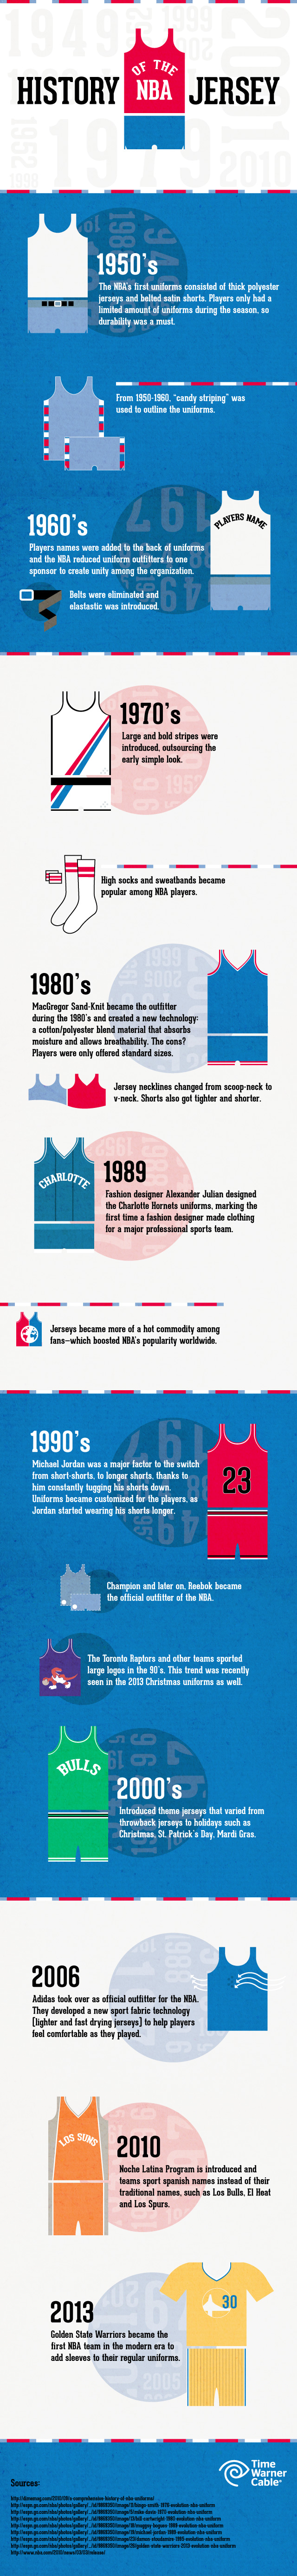 History of the NBA jersey